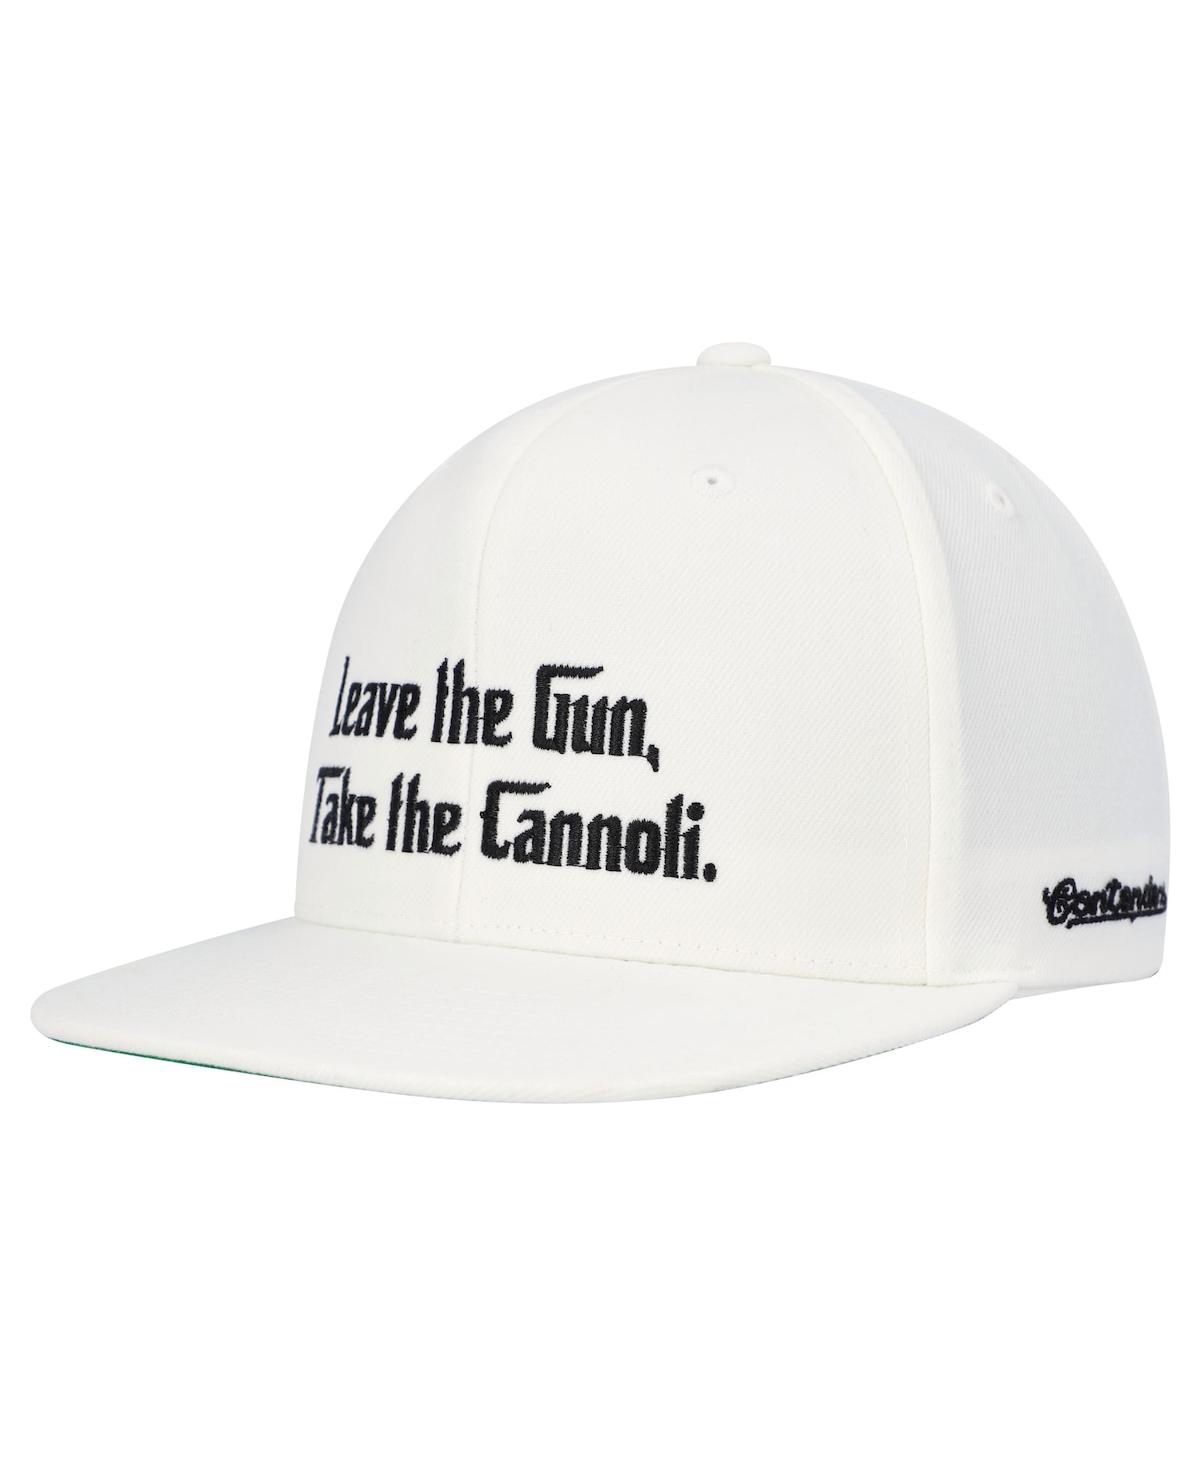 Men's and Women's Contenders Clothing White The Godfather Leave the Gun, Take the Cannoli Snapback Hat - White